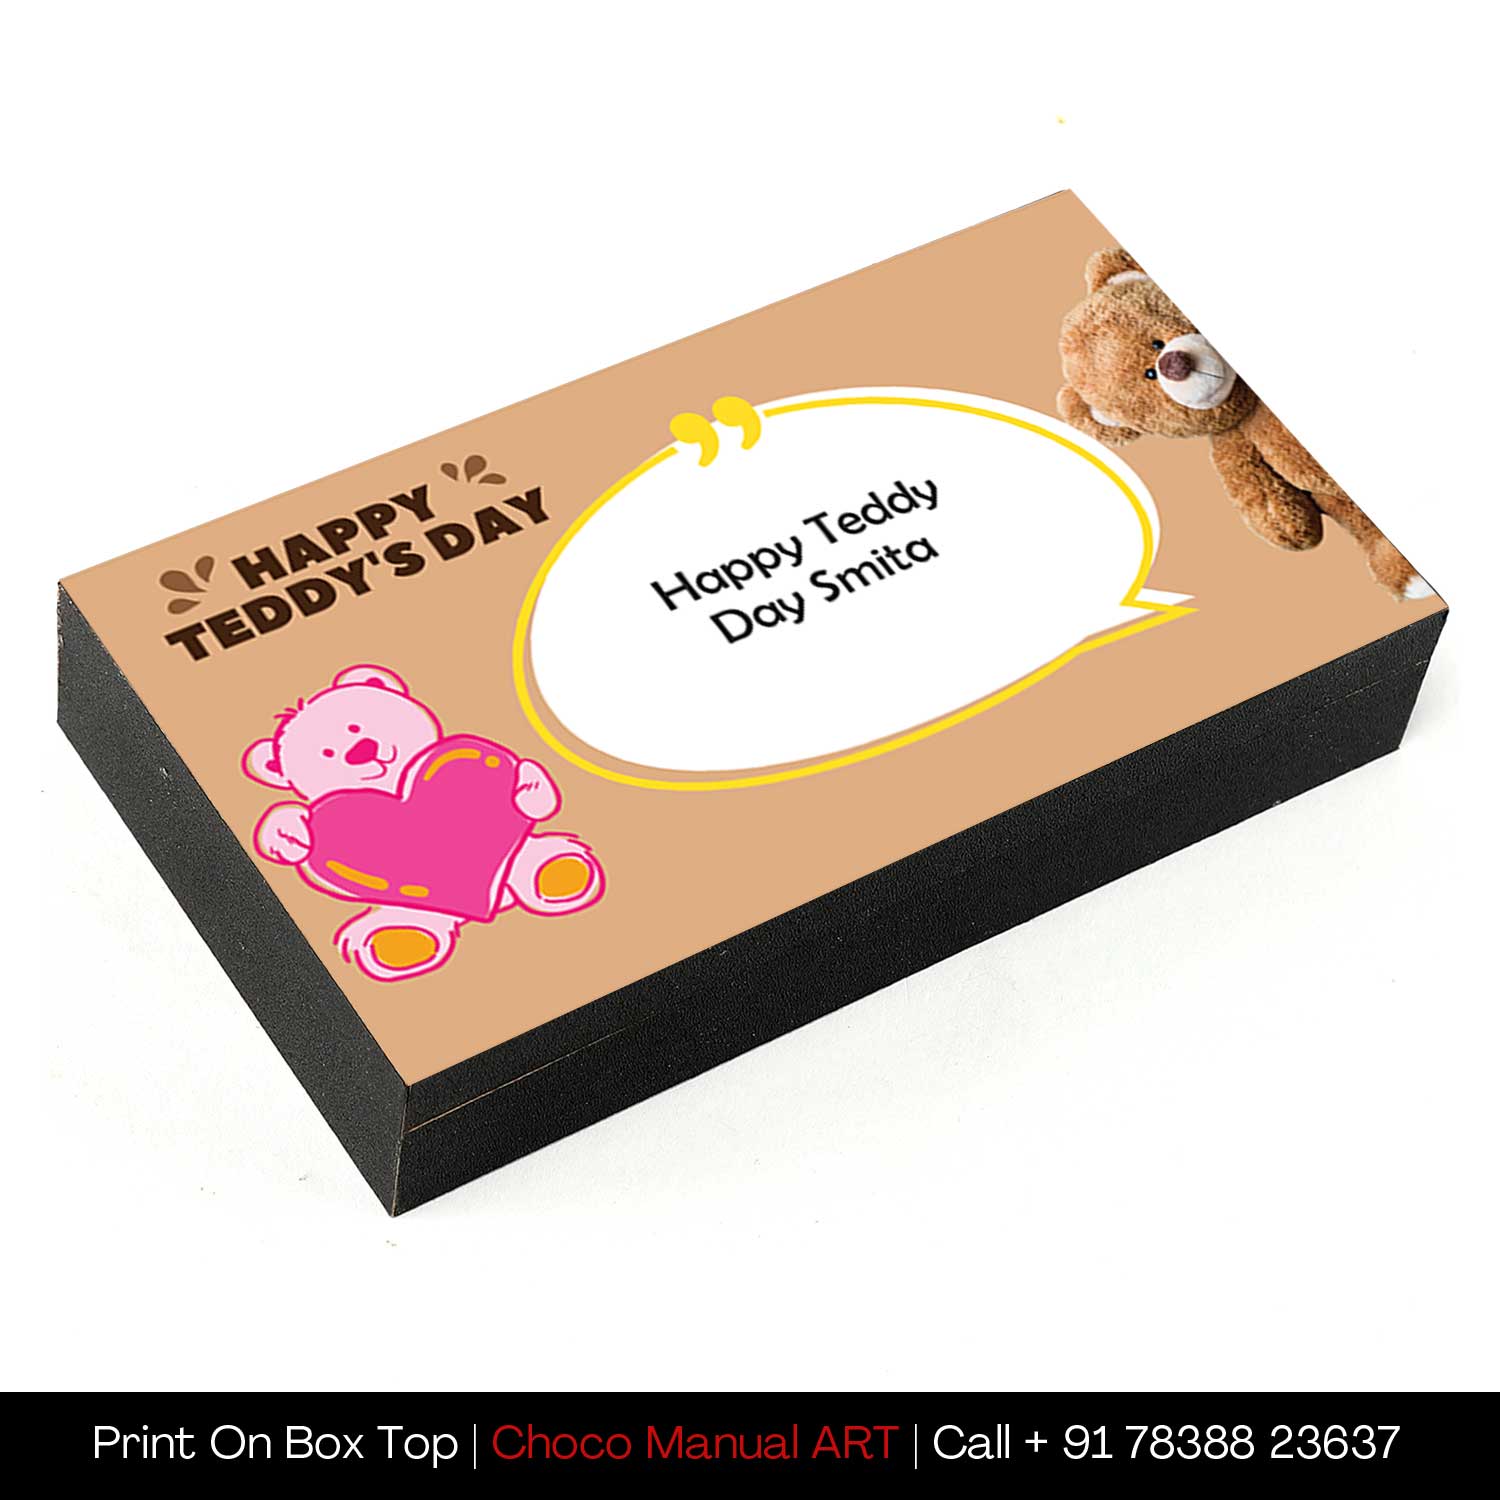 Best Teddy Day image/name printed gift for friend